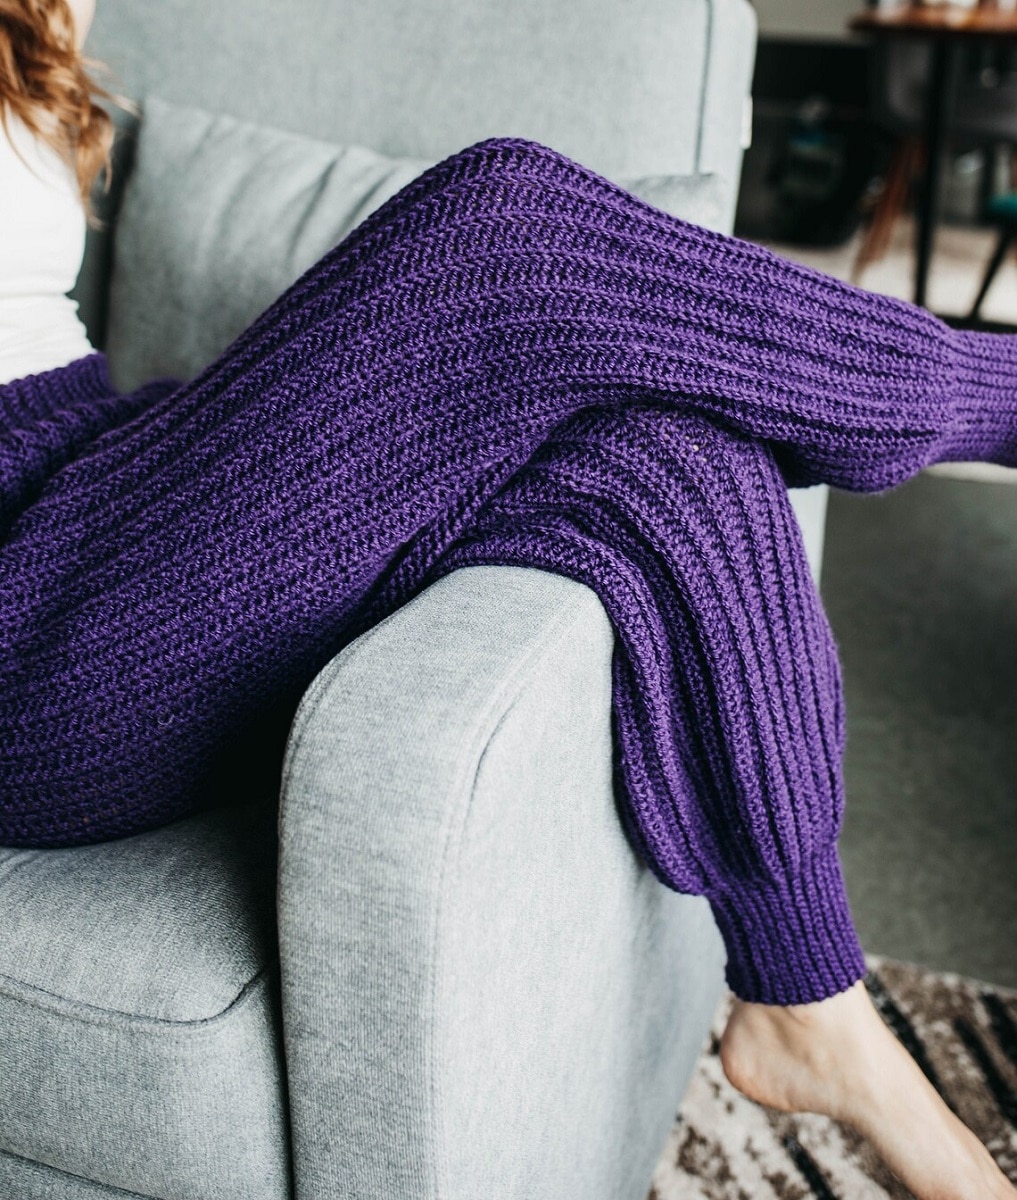 Deep purple crochet baggy trousers with a cuff at the bottom, worn by a woman with her legs over the arm of a couch.